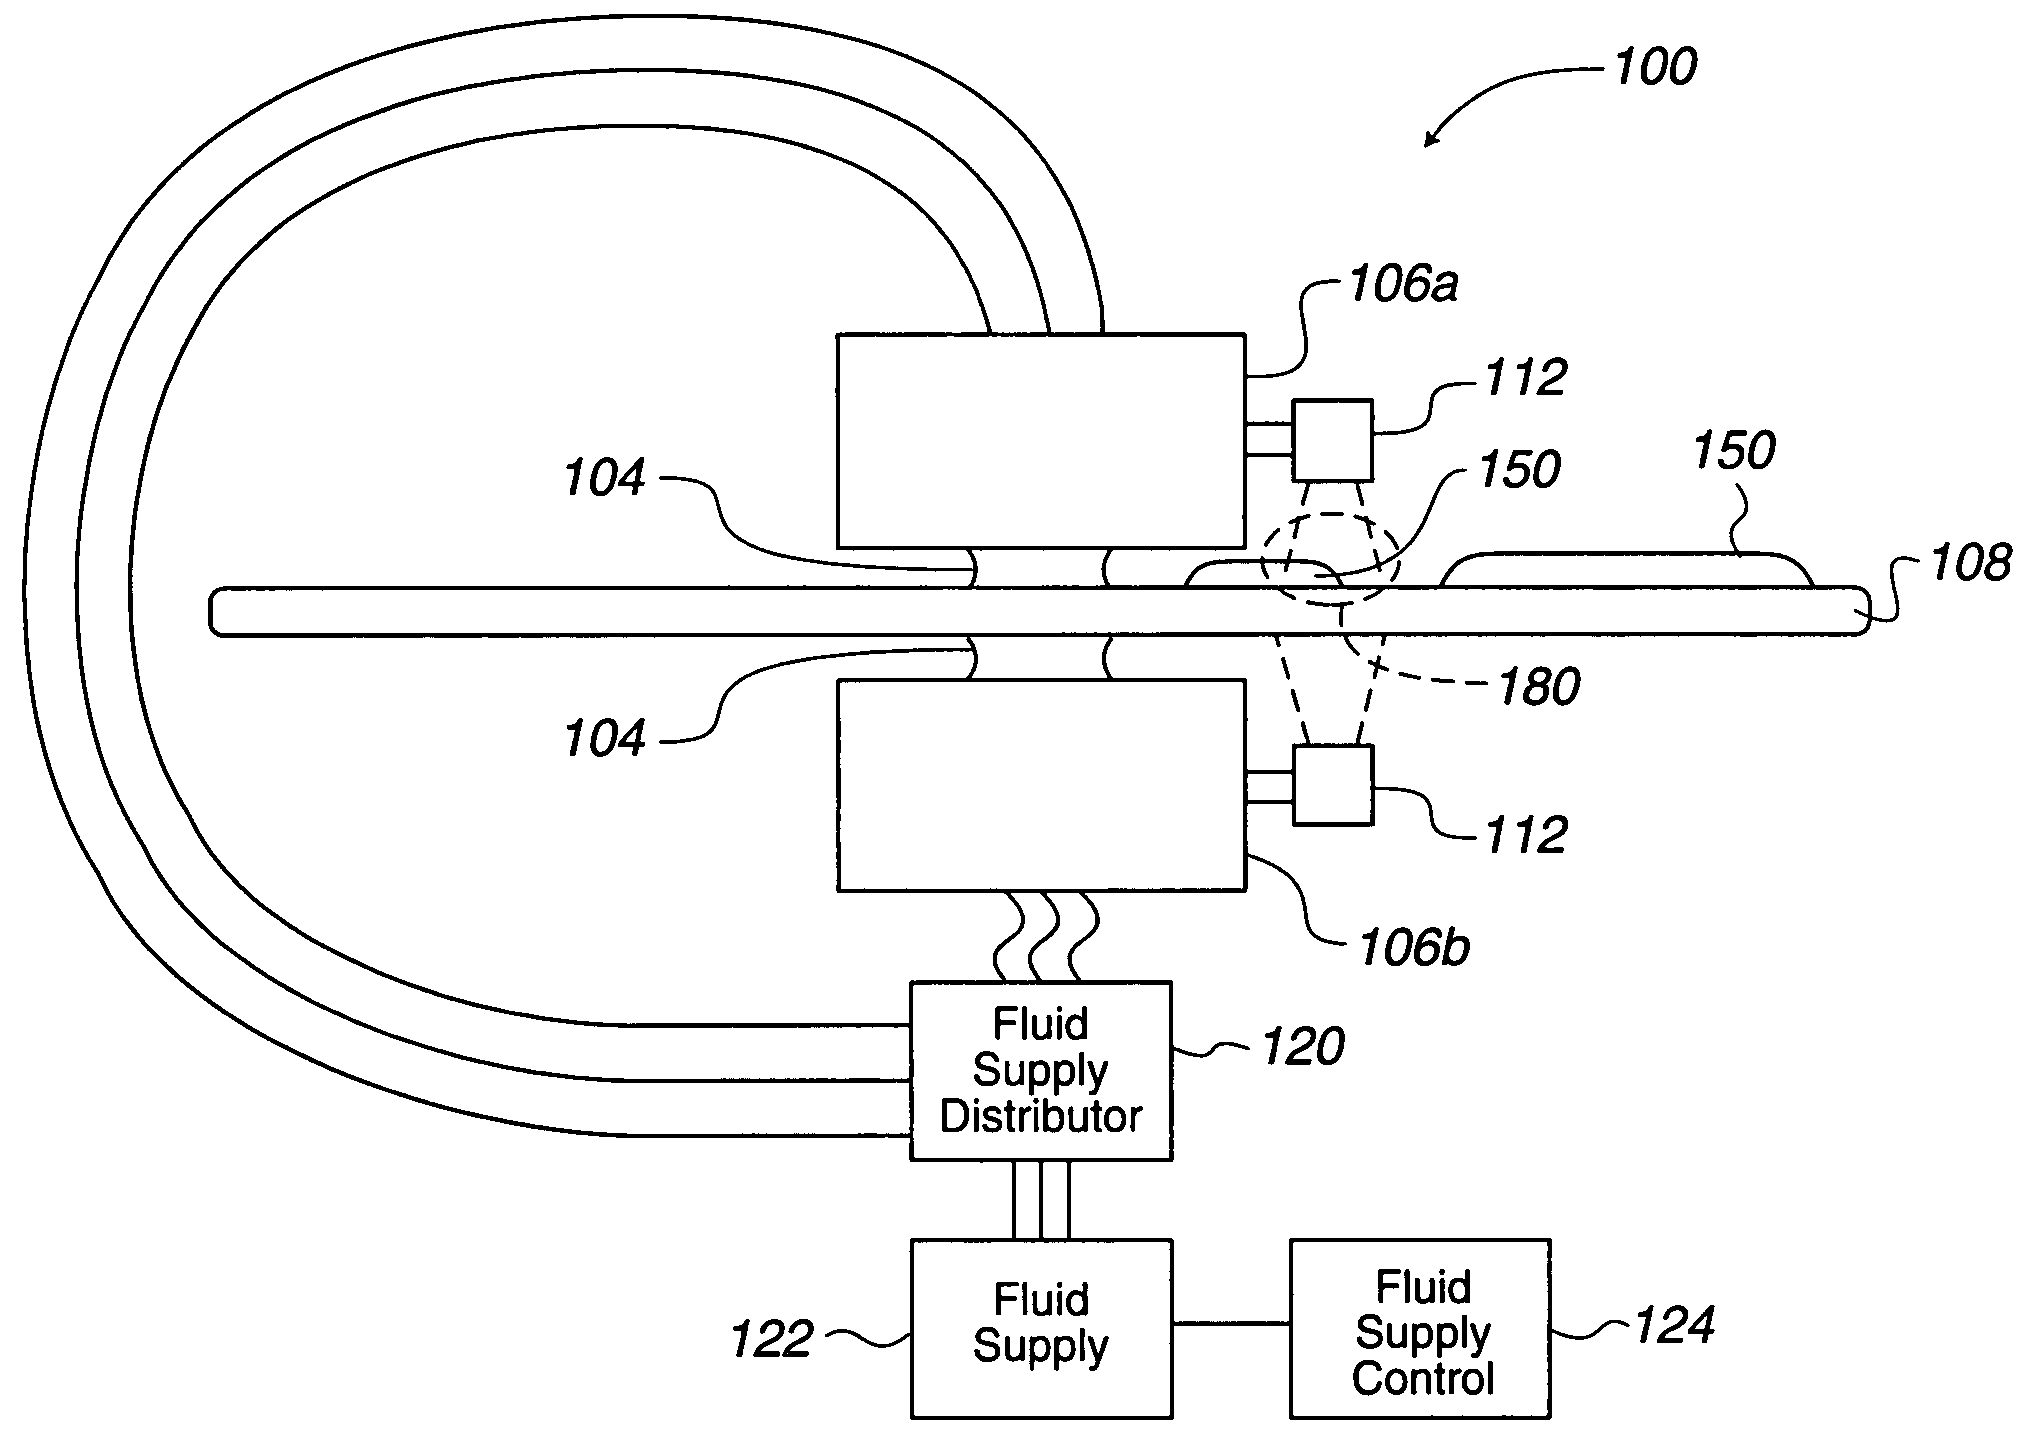 Controls of ambient environment during wafer drying using proximity head